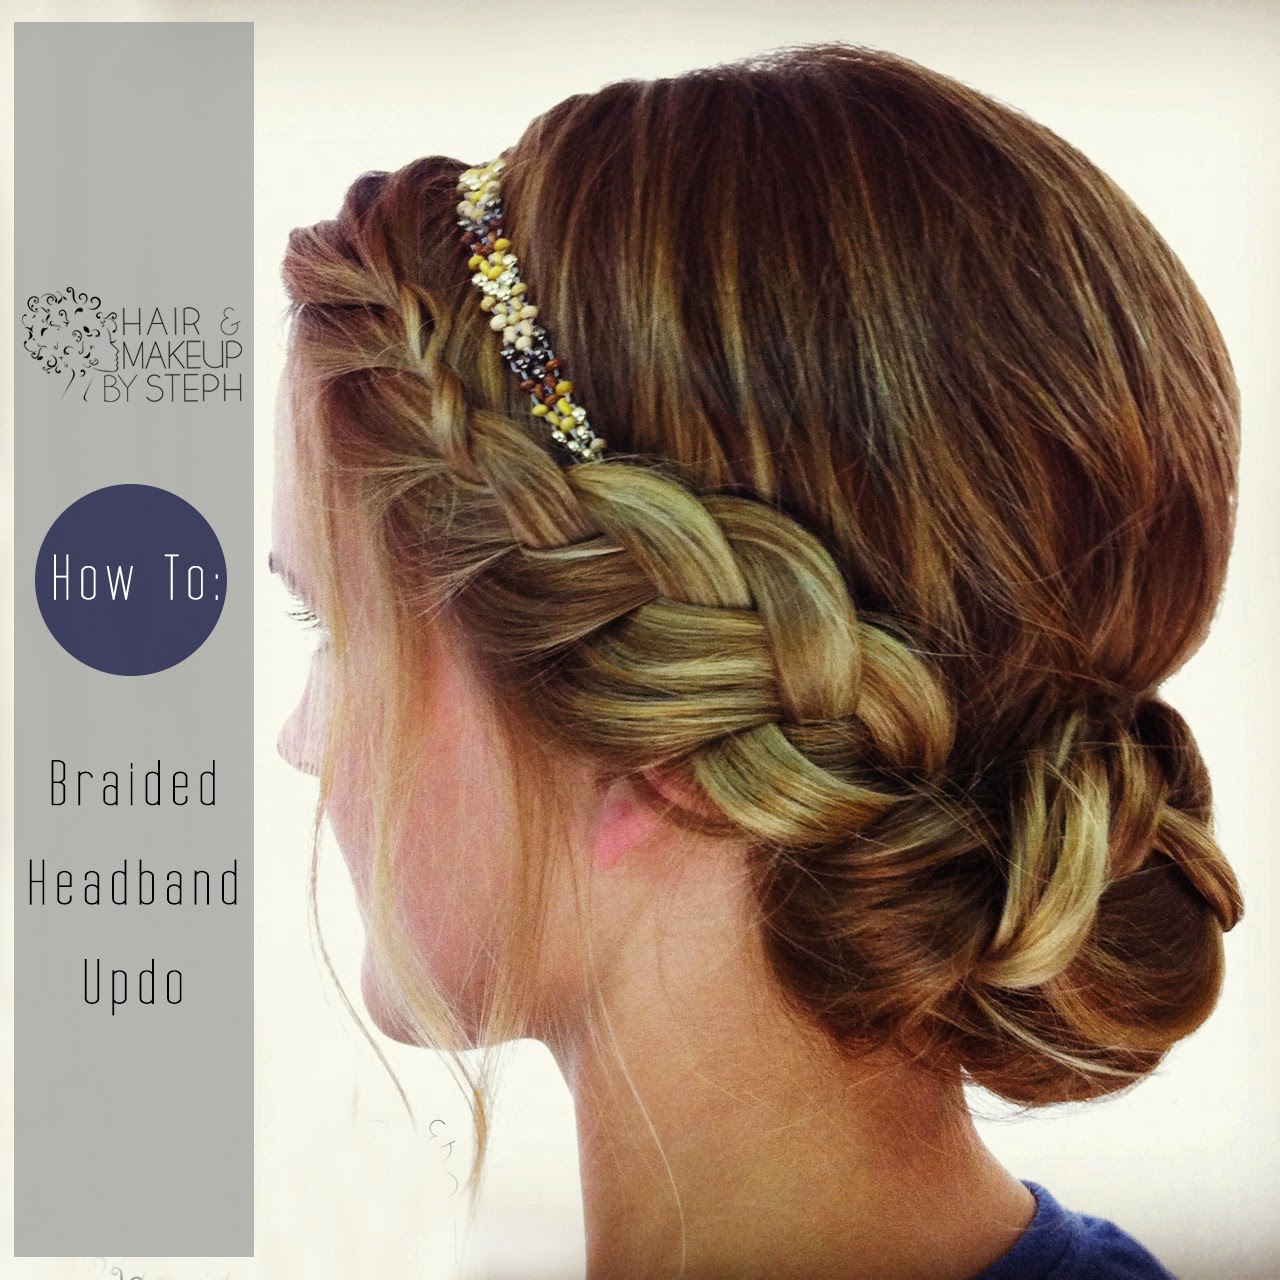 Hair And Make Up By Steph How To Braided Headband Updo